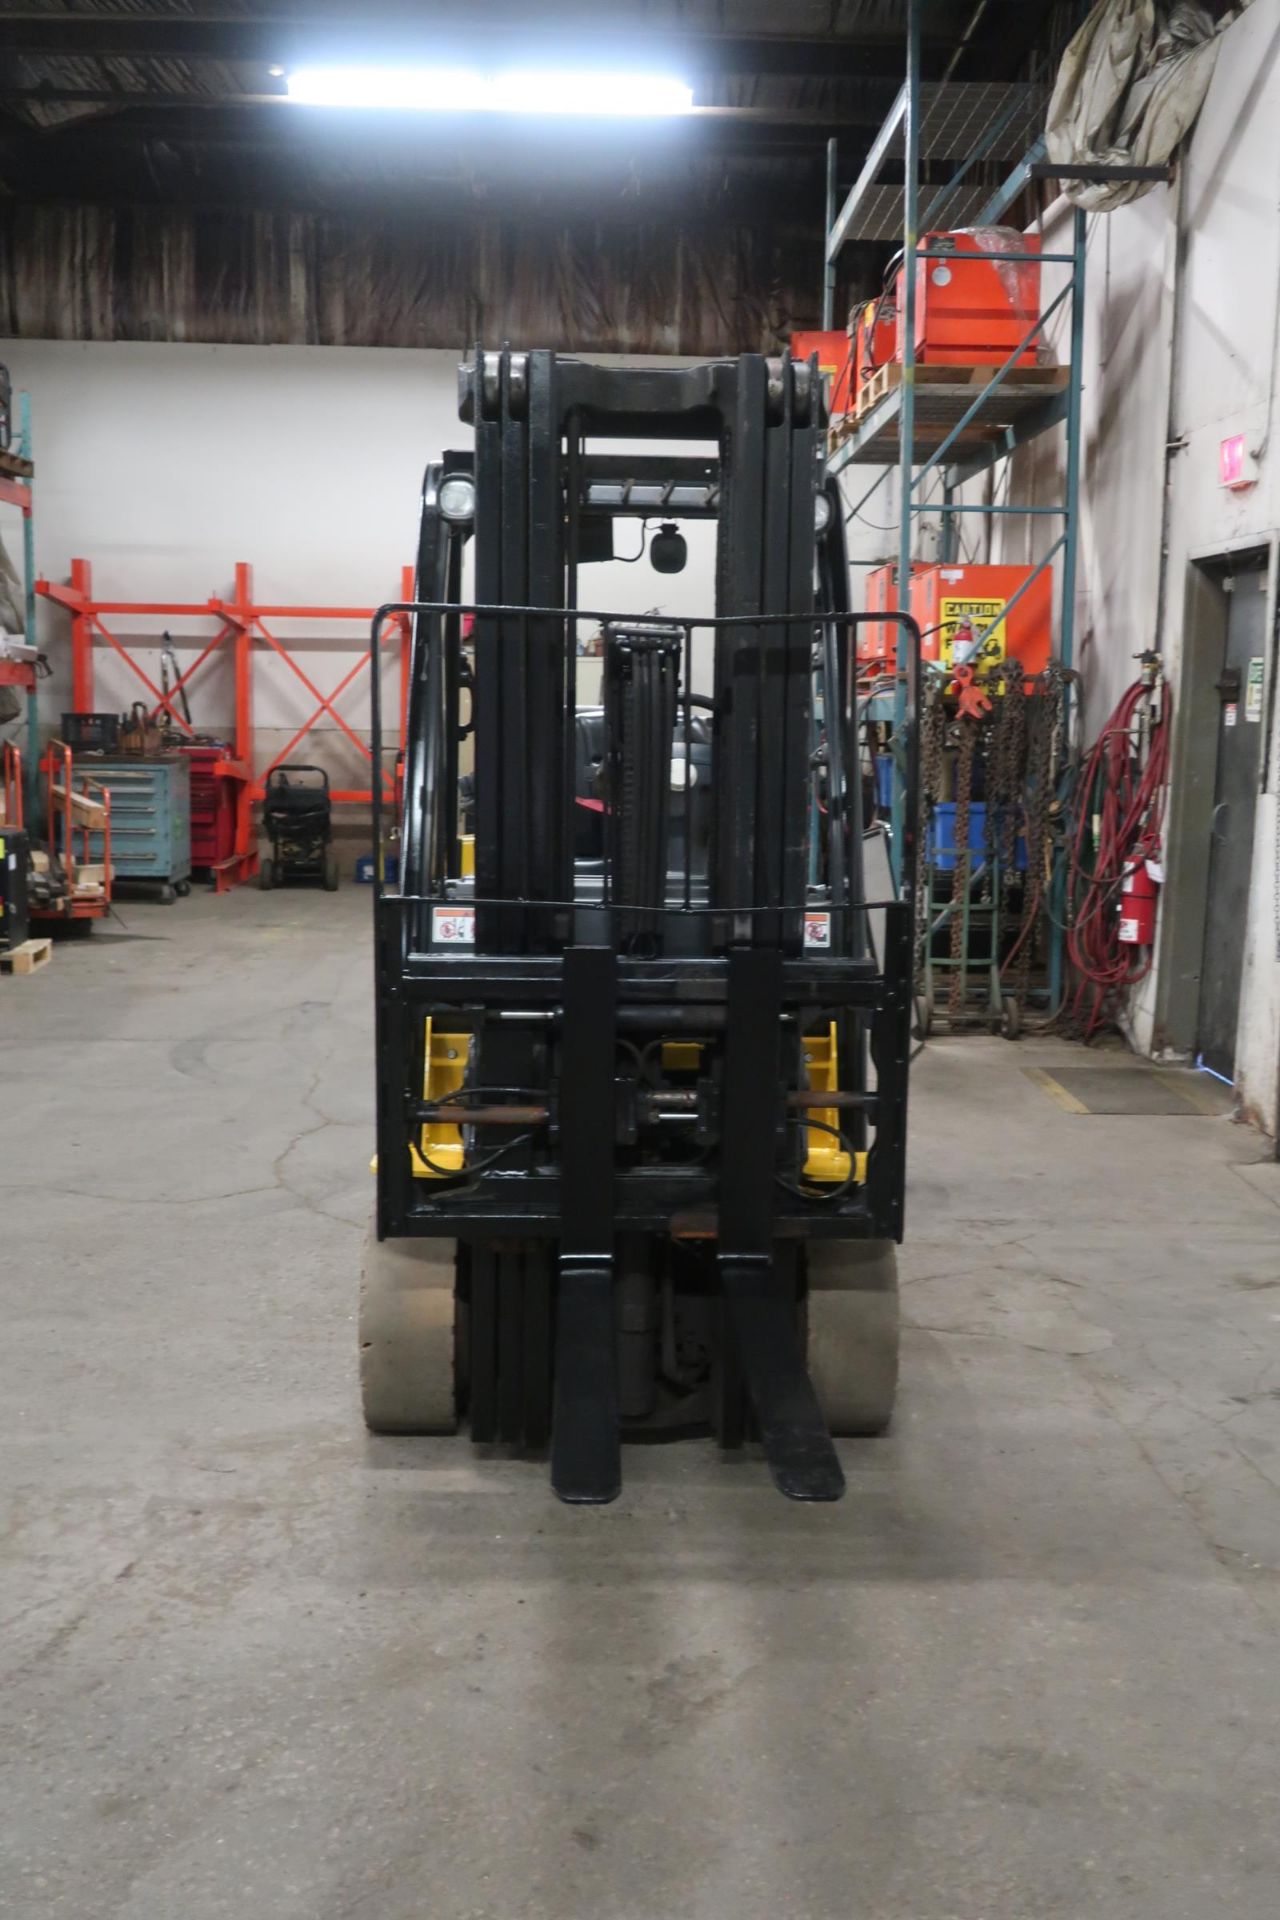 FREE CUSTOMS - 2015 Yale 6000lbs Capacity Forklift with 3-stage mast & sideshift & Fork Positioner - Image 2 of 2